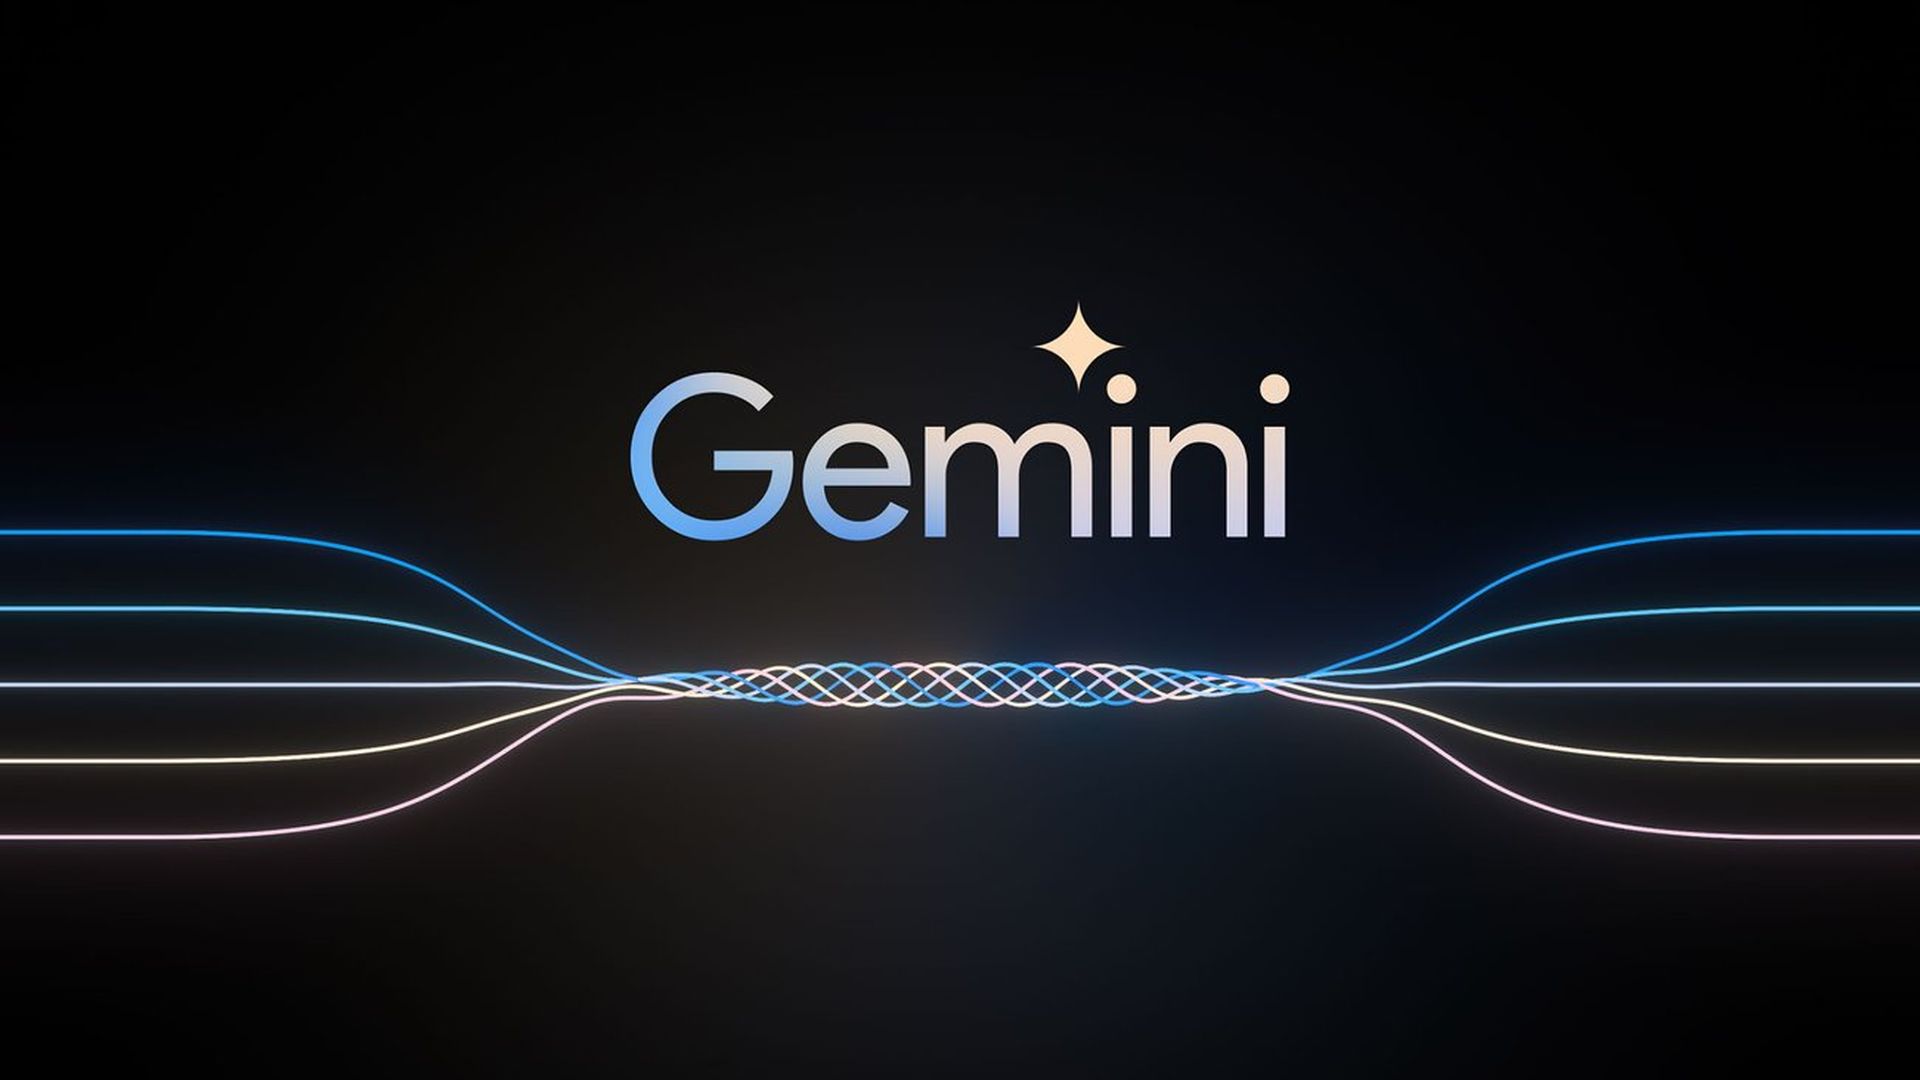 How to use Gemini on Chrome browser